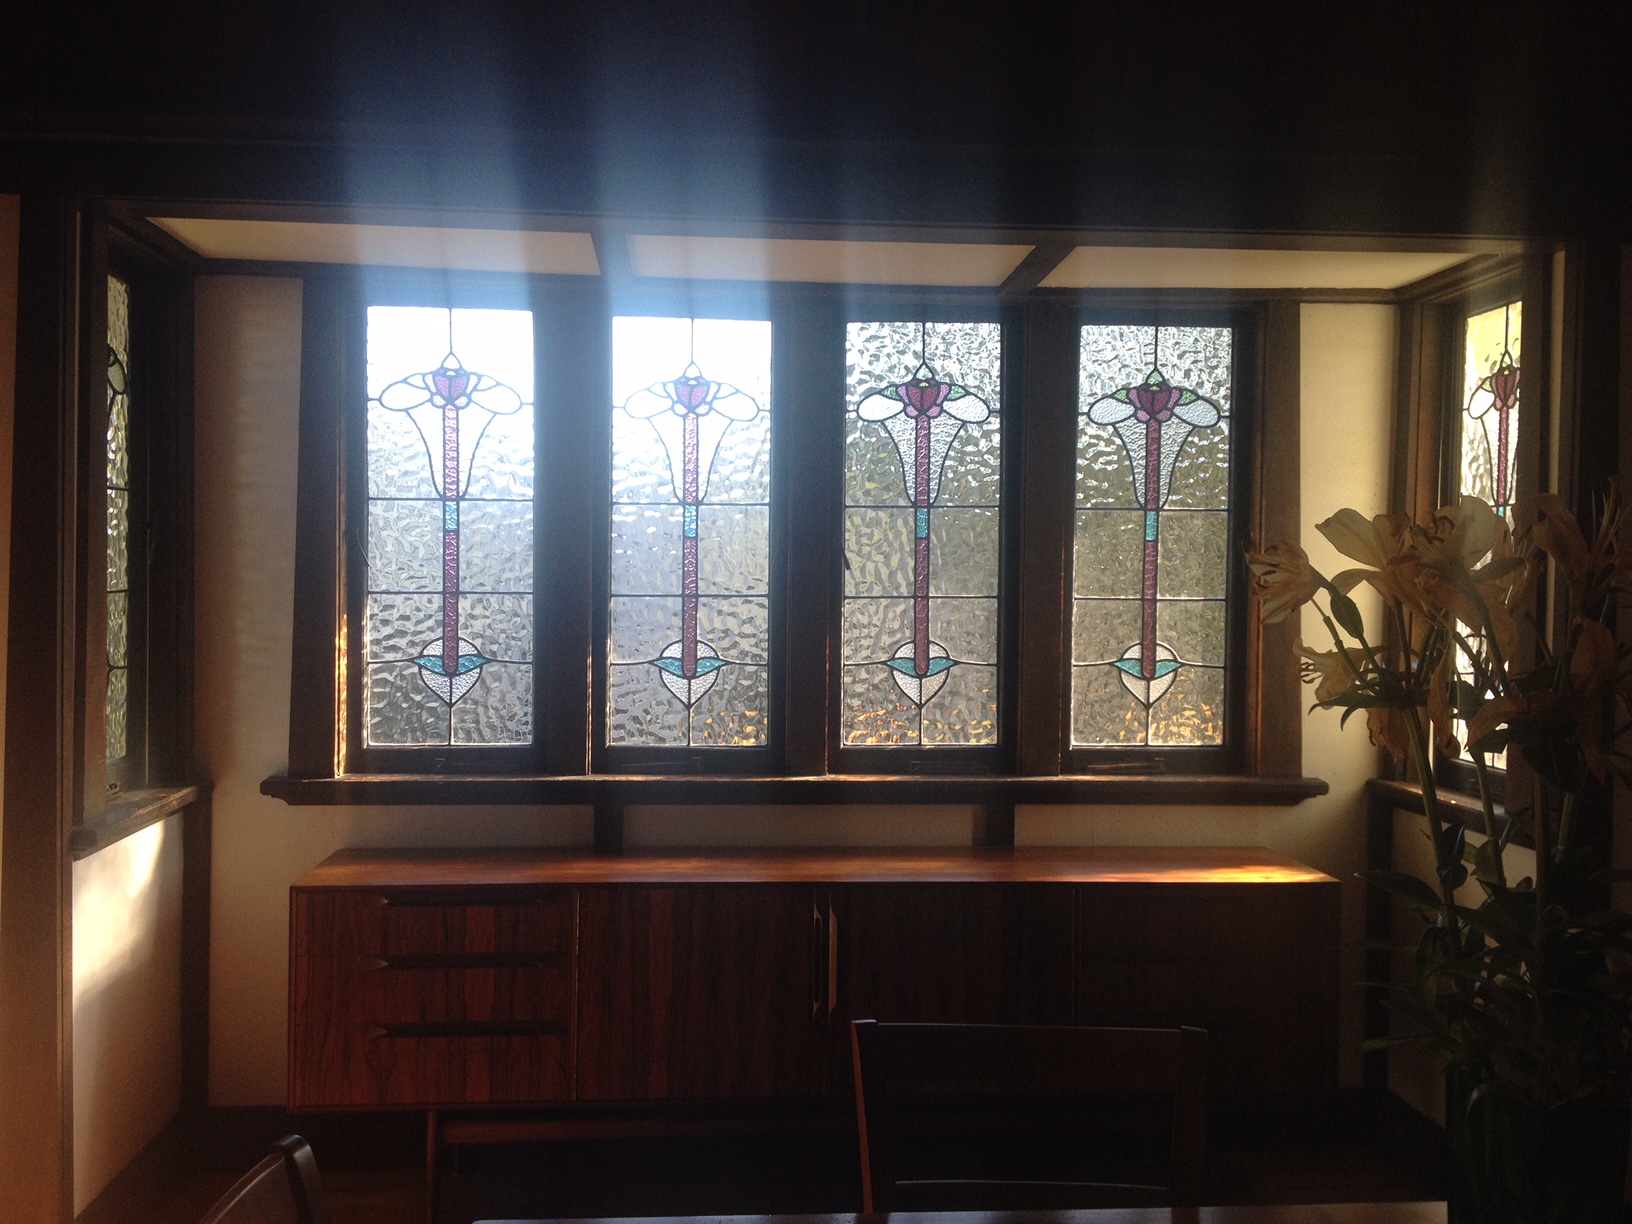 The restored leadlight windows installed in the Yeronga house.